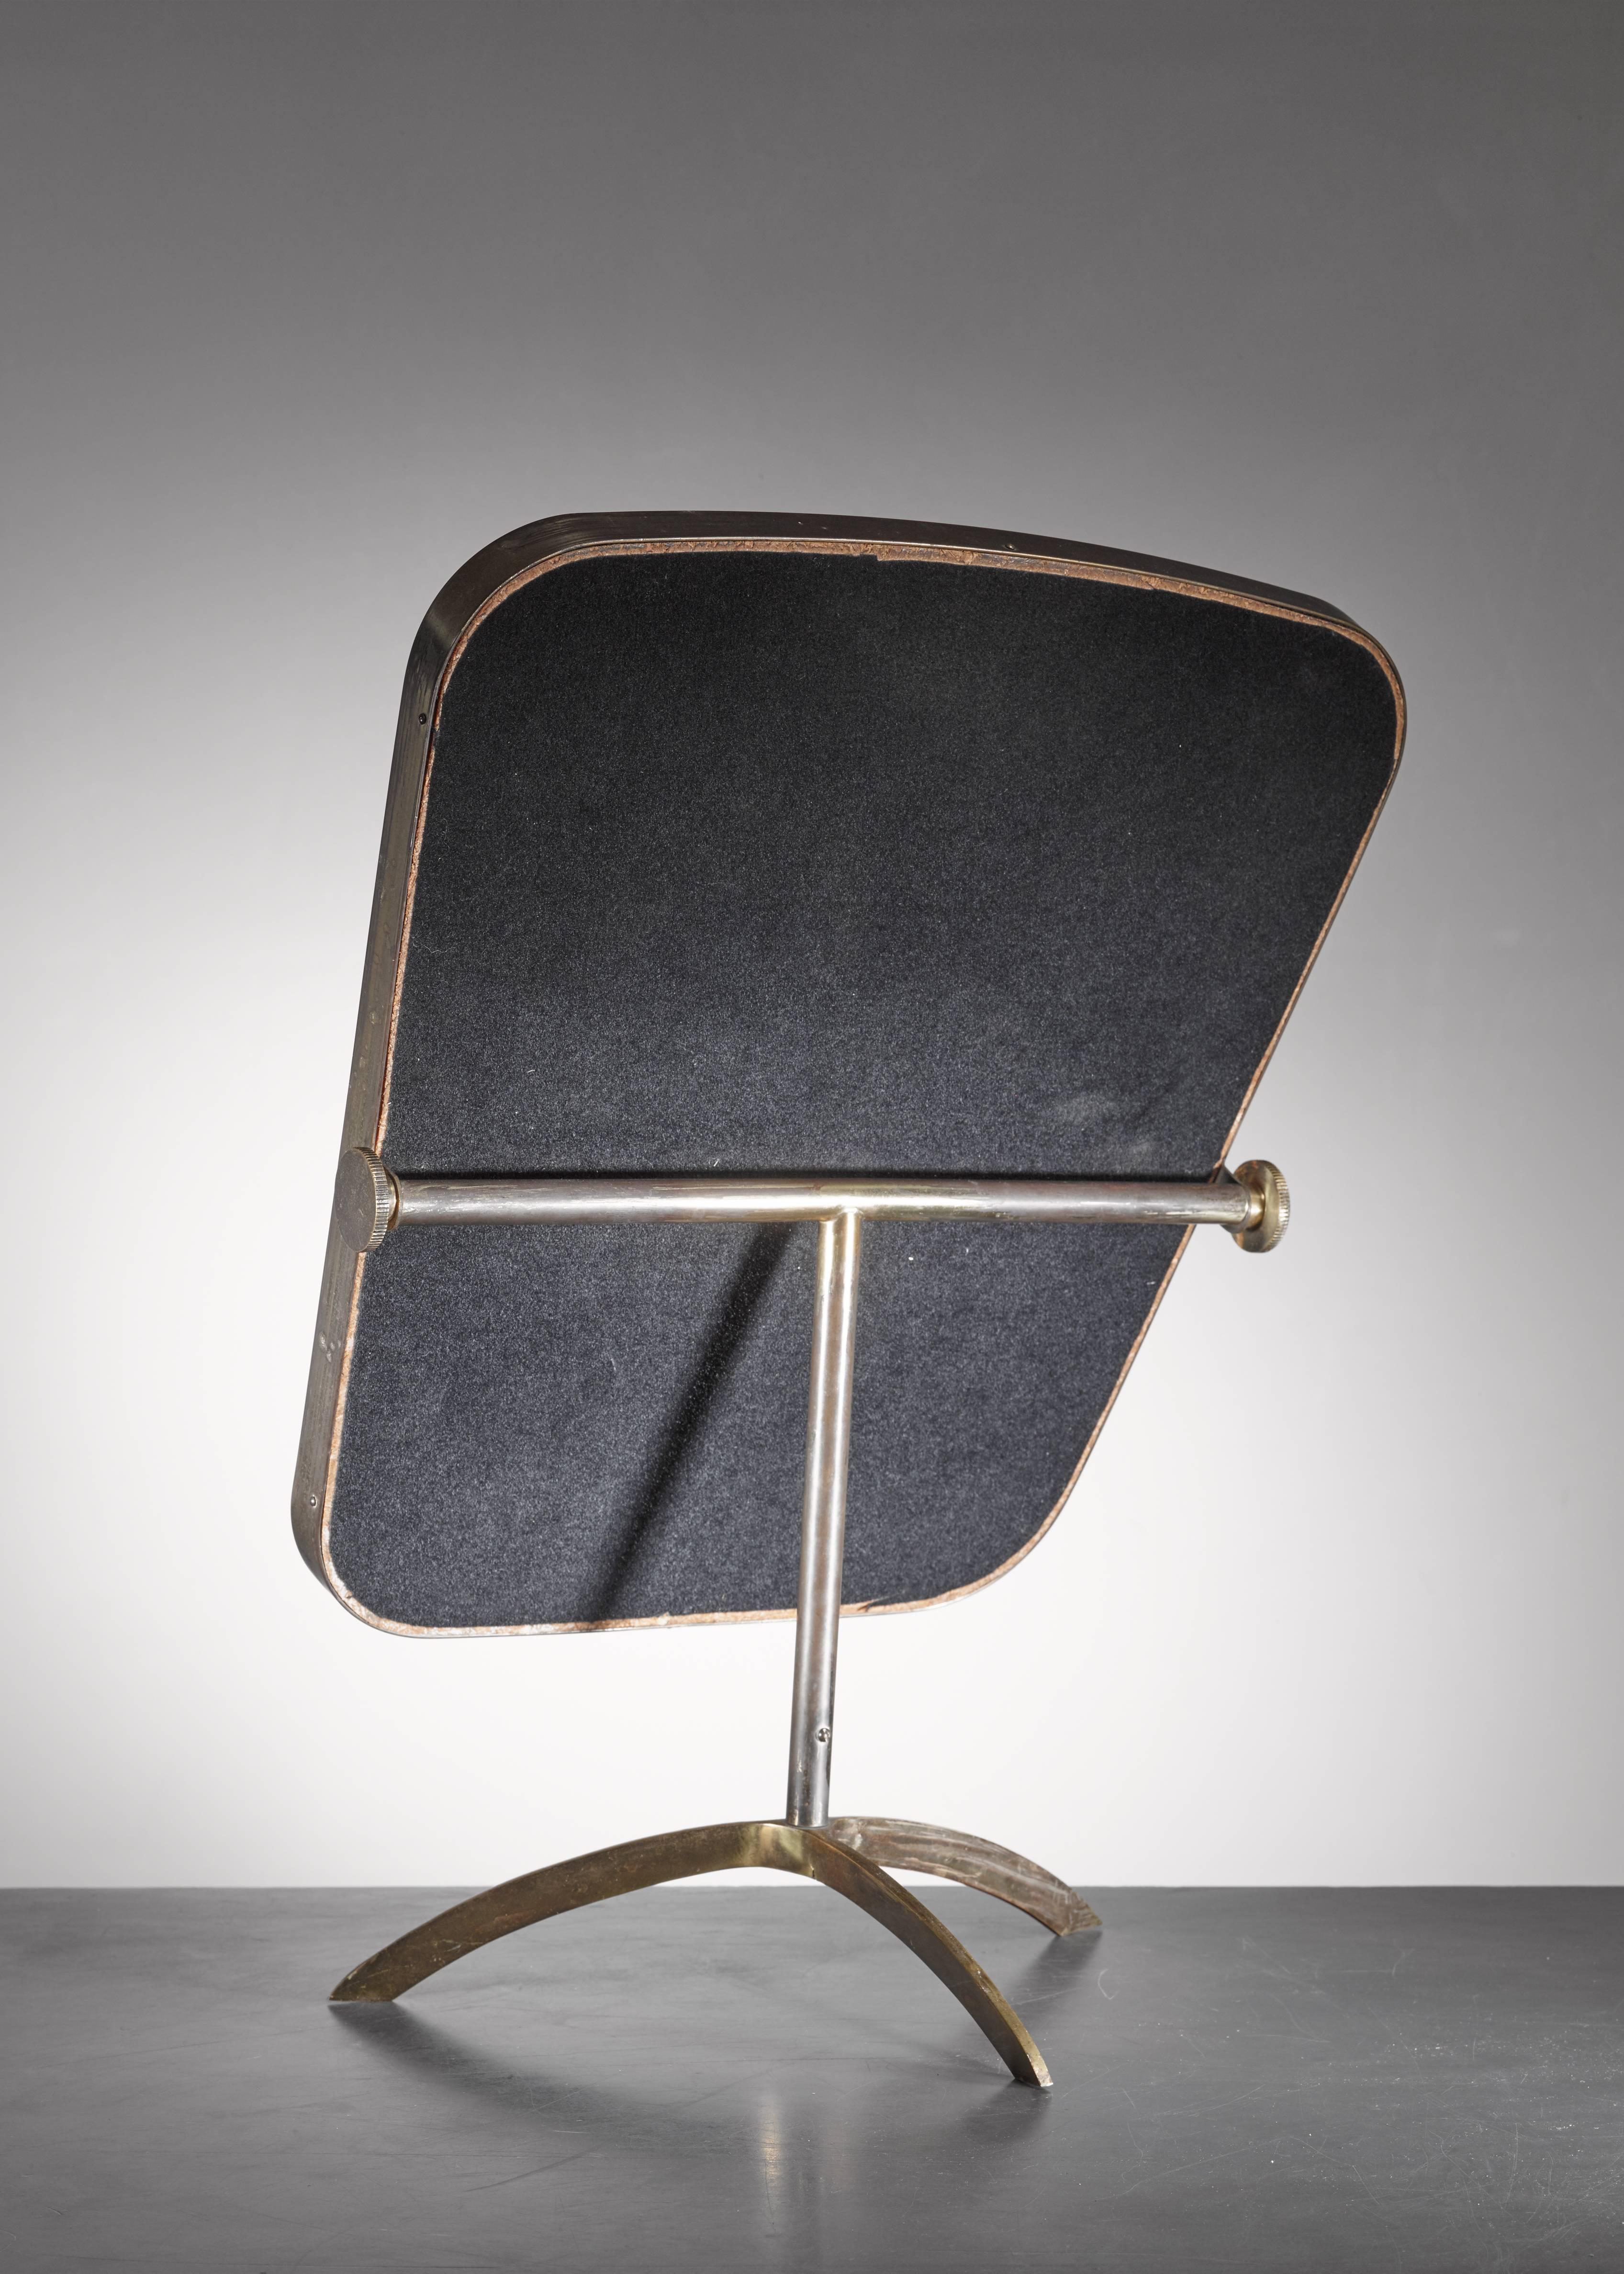 An adjustable brass console mirror on a tripod foot with a small white inside rim. The back of the mirror is covered with a black fabric.
